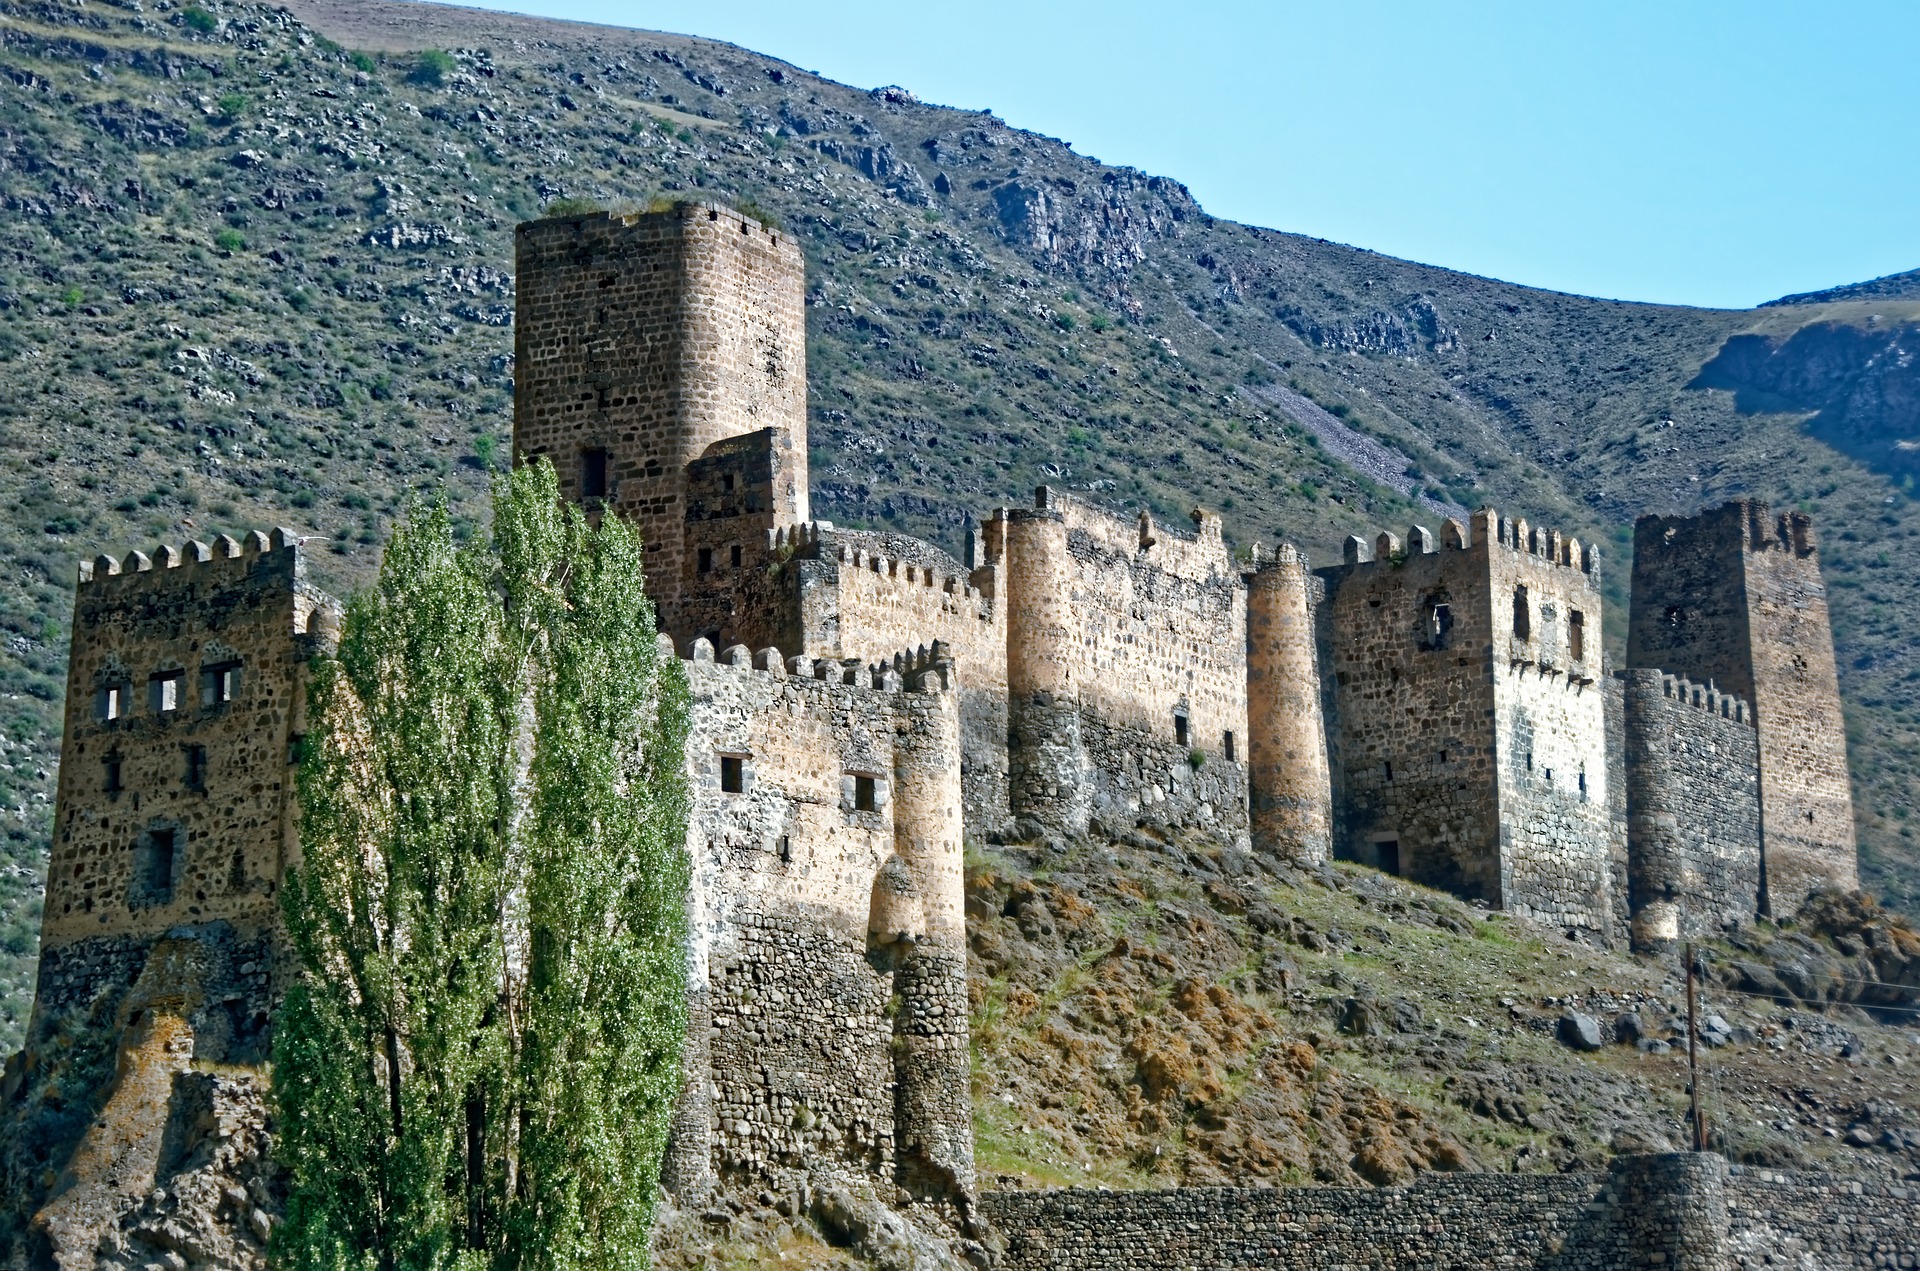 Khertvisi fortress castle, in the Meskheti region, is one of the oldest fortresses in Georgia and was functional throughout the Georgian feudal period.